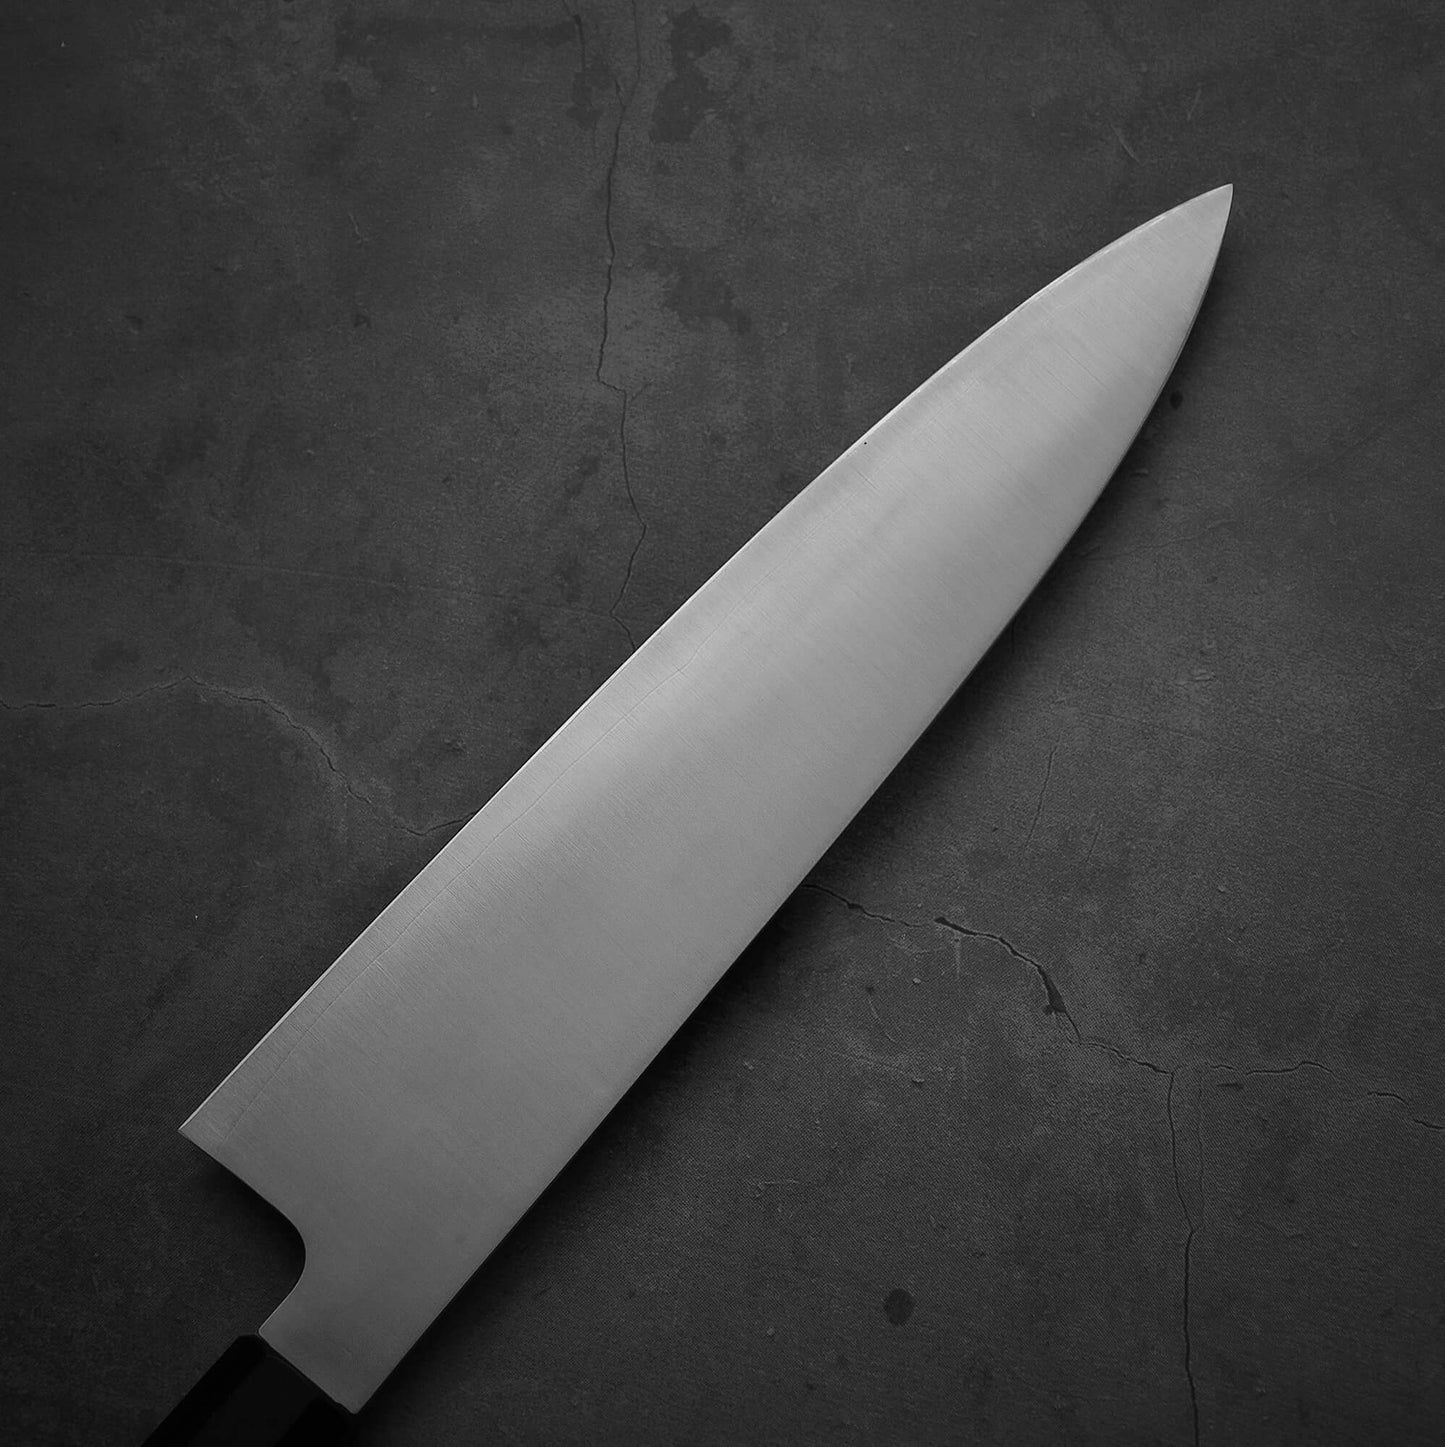 Top view of the blade of Sukenari XEOS gyuto 240mm. Image shows left side of the blade